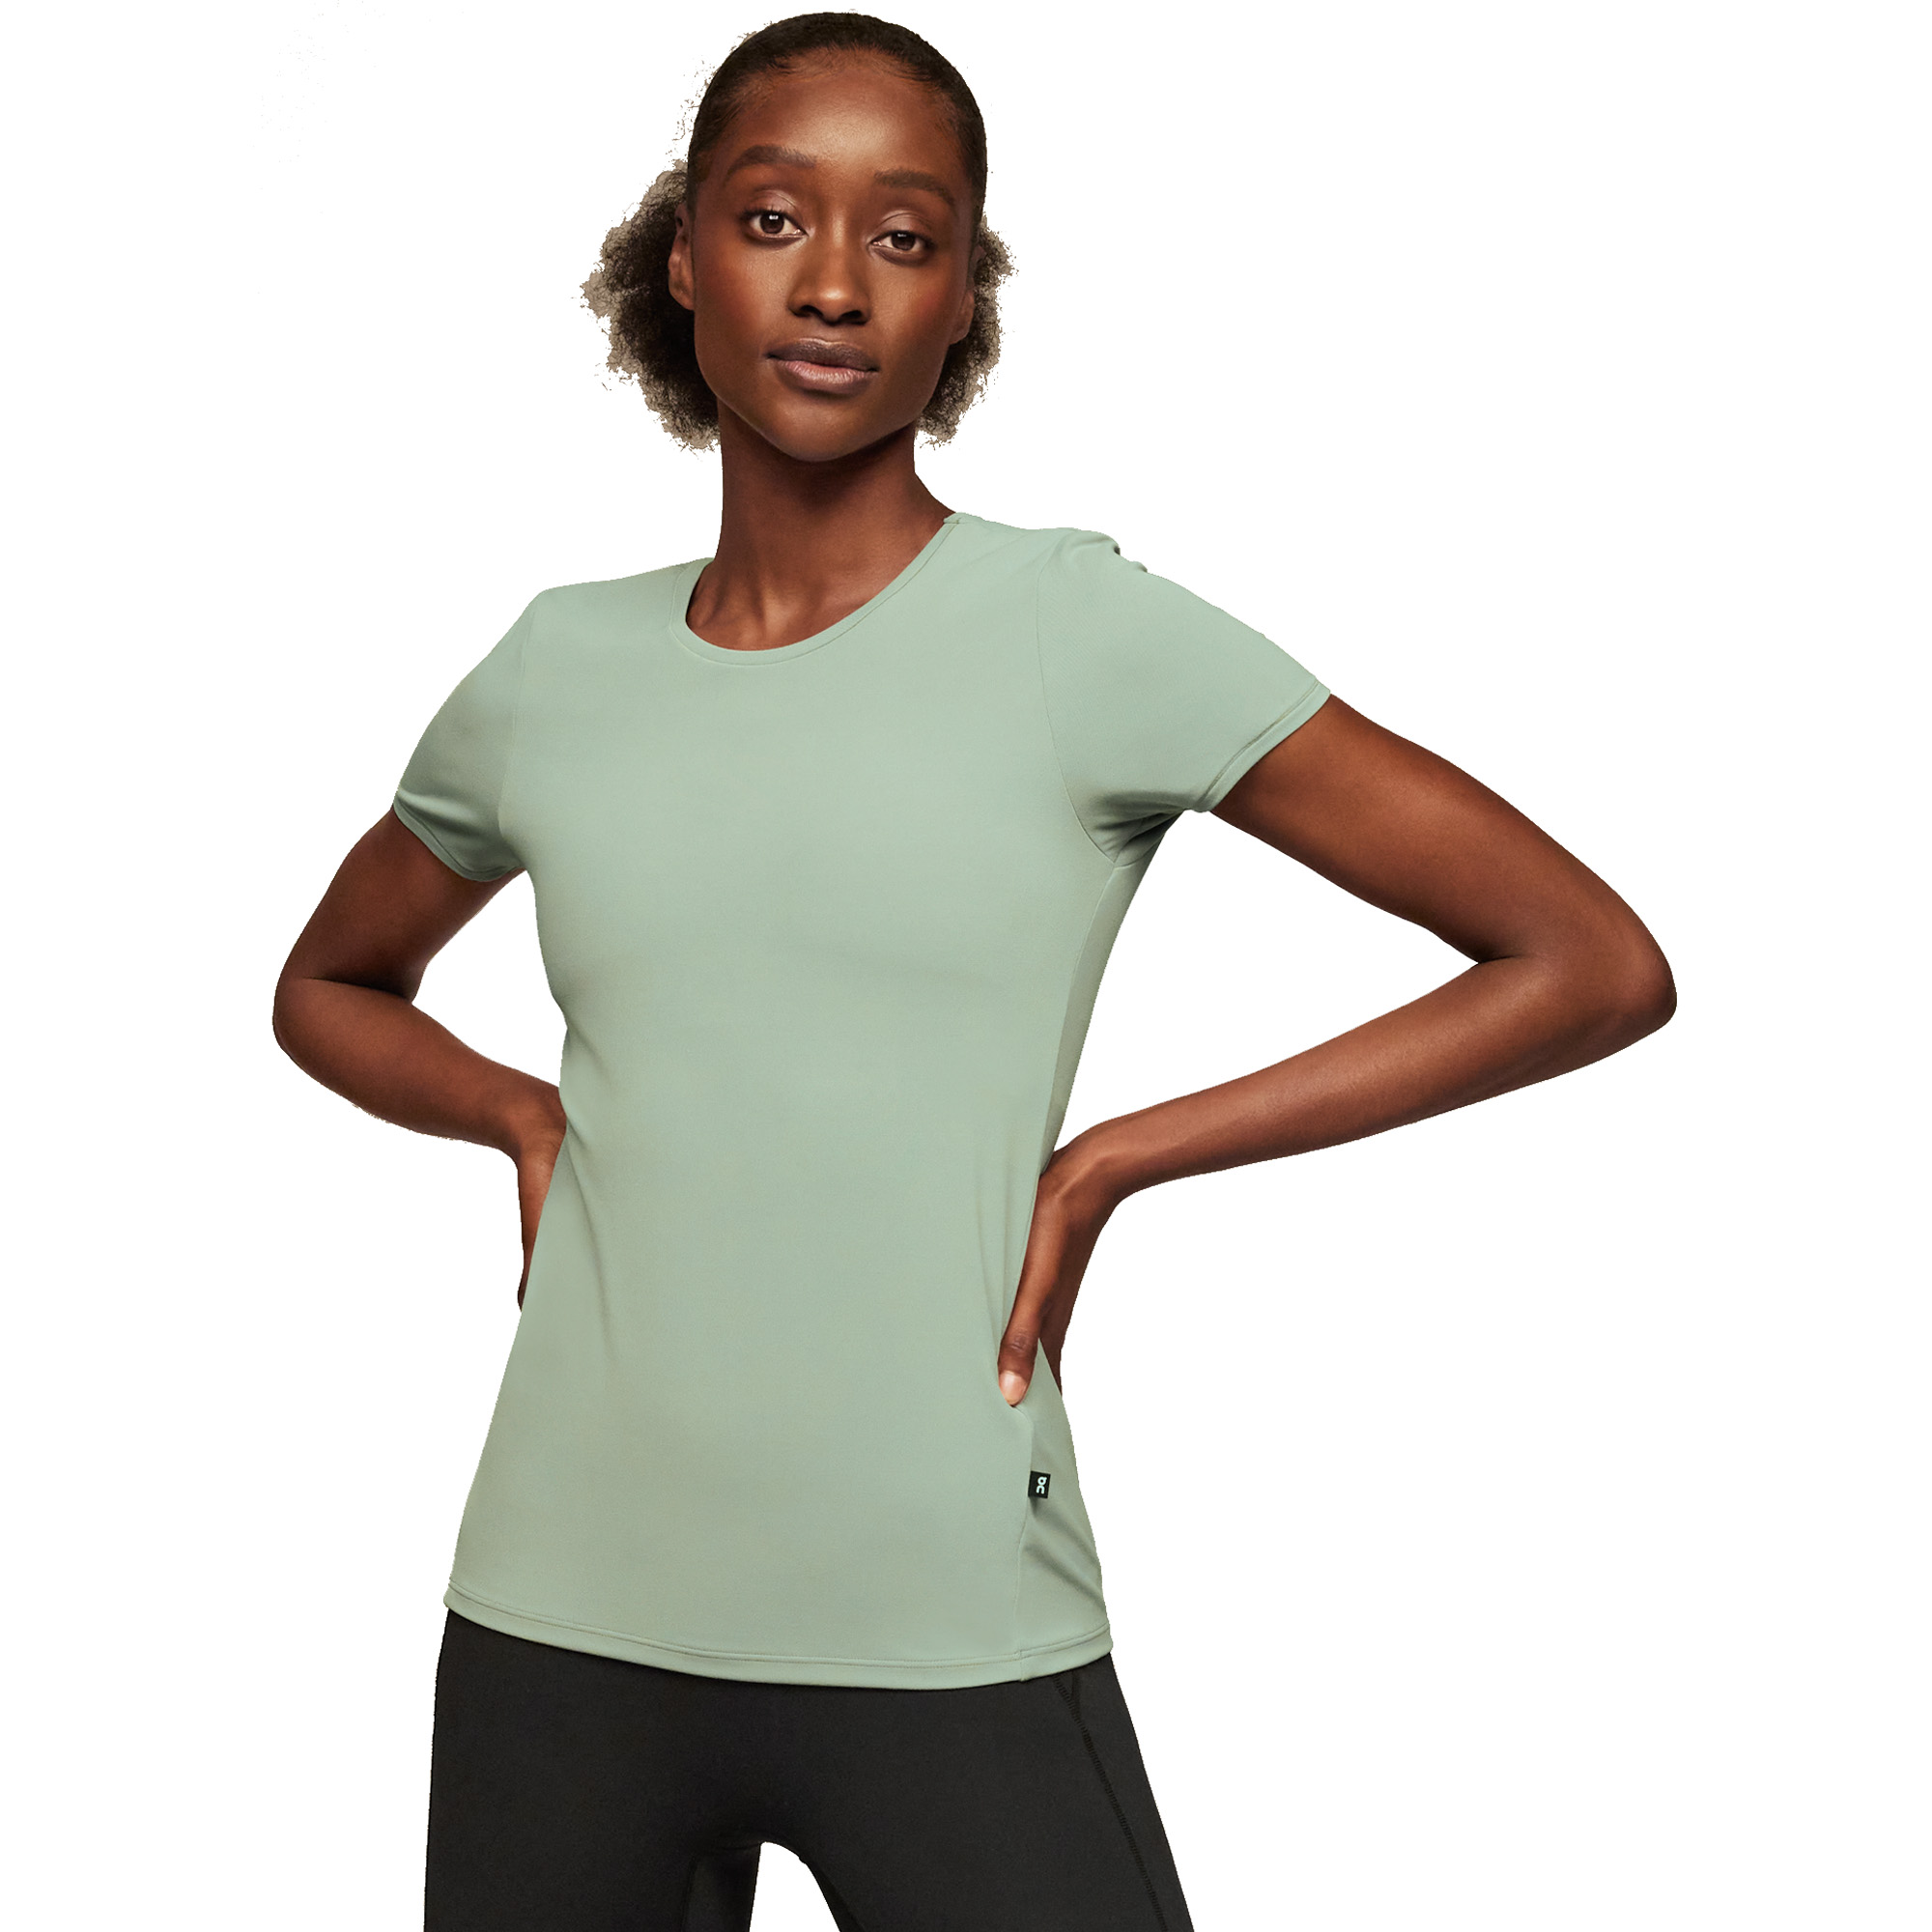 On Movement-T Women's Top 